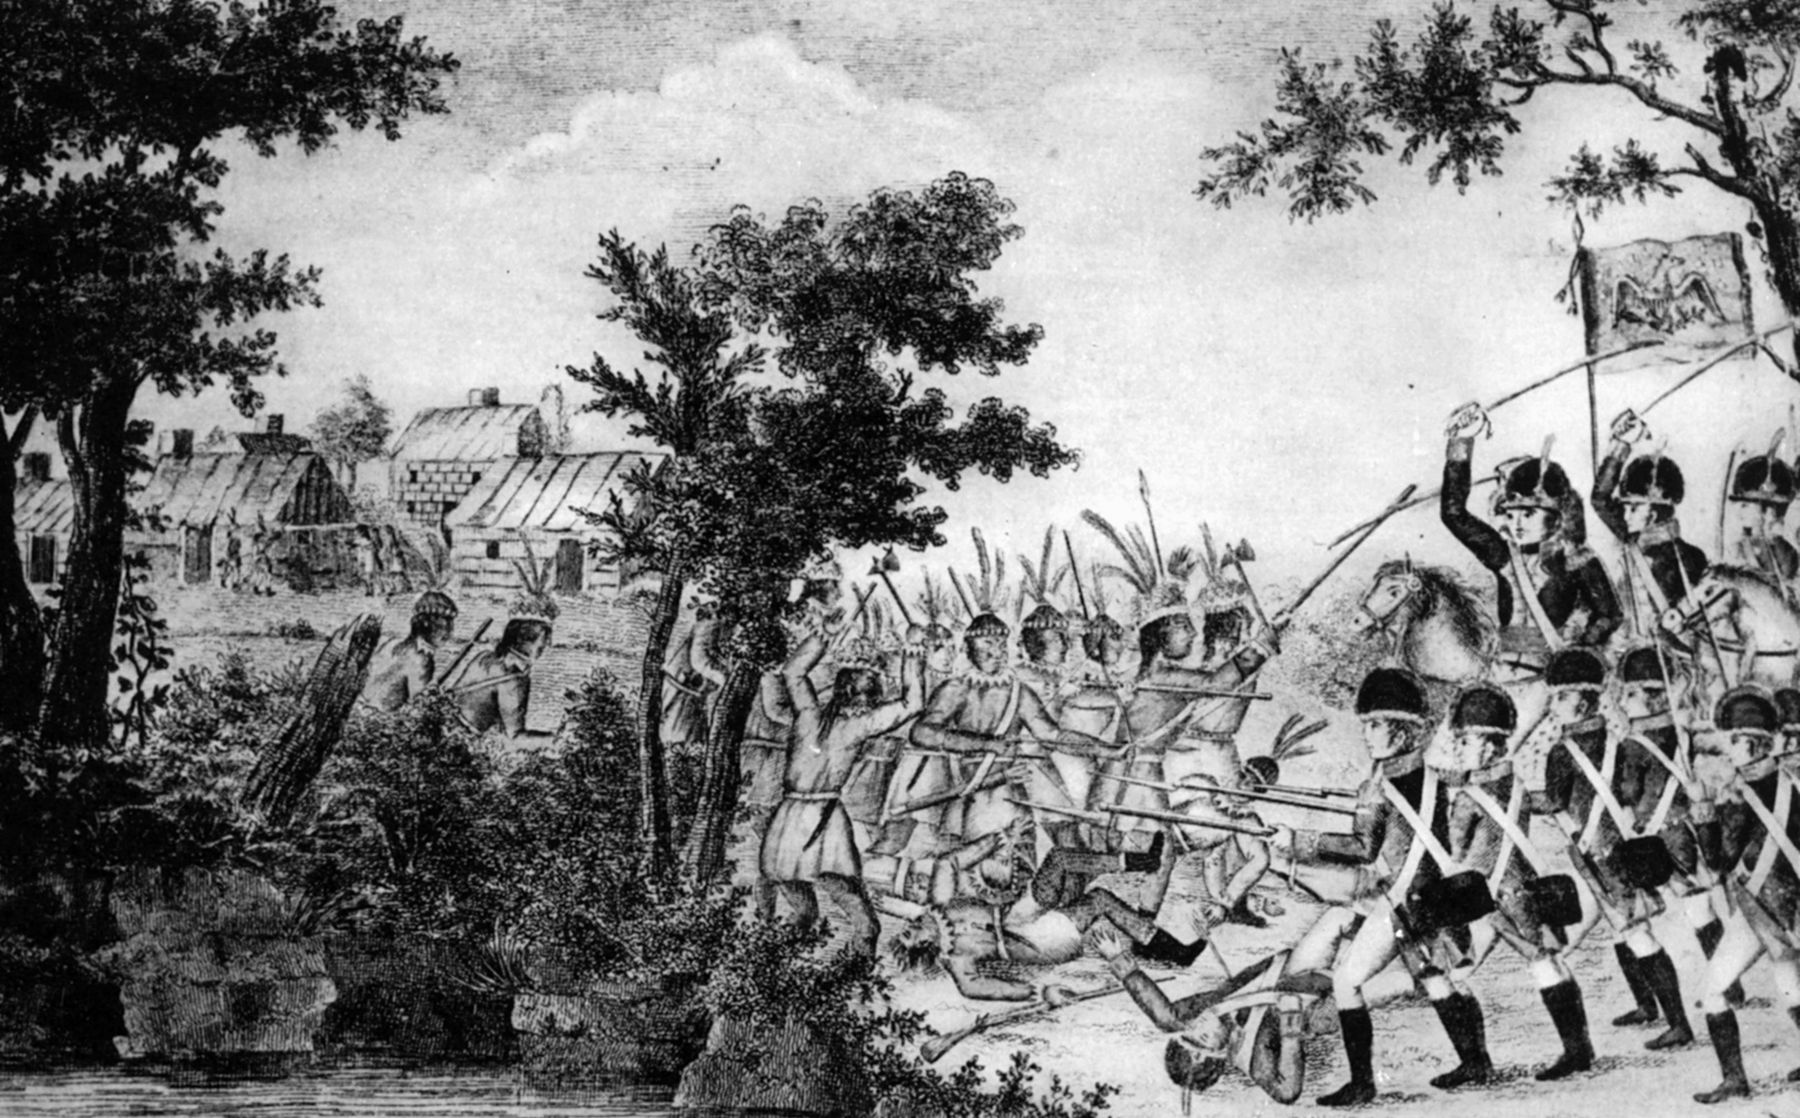 Creek warriors armed with hatchets, bows, and arrows rush to defend their village from well-disciplined American soldiers in this contemporary engraving.